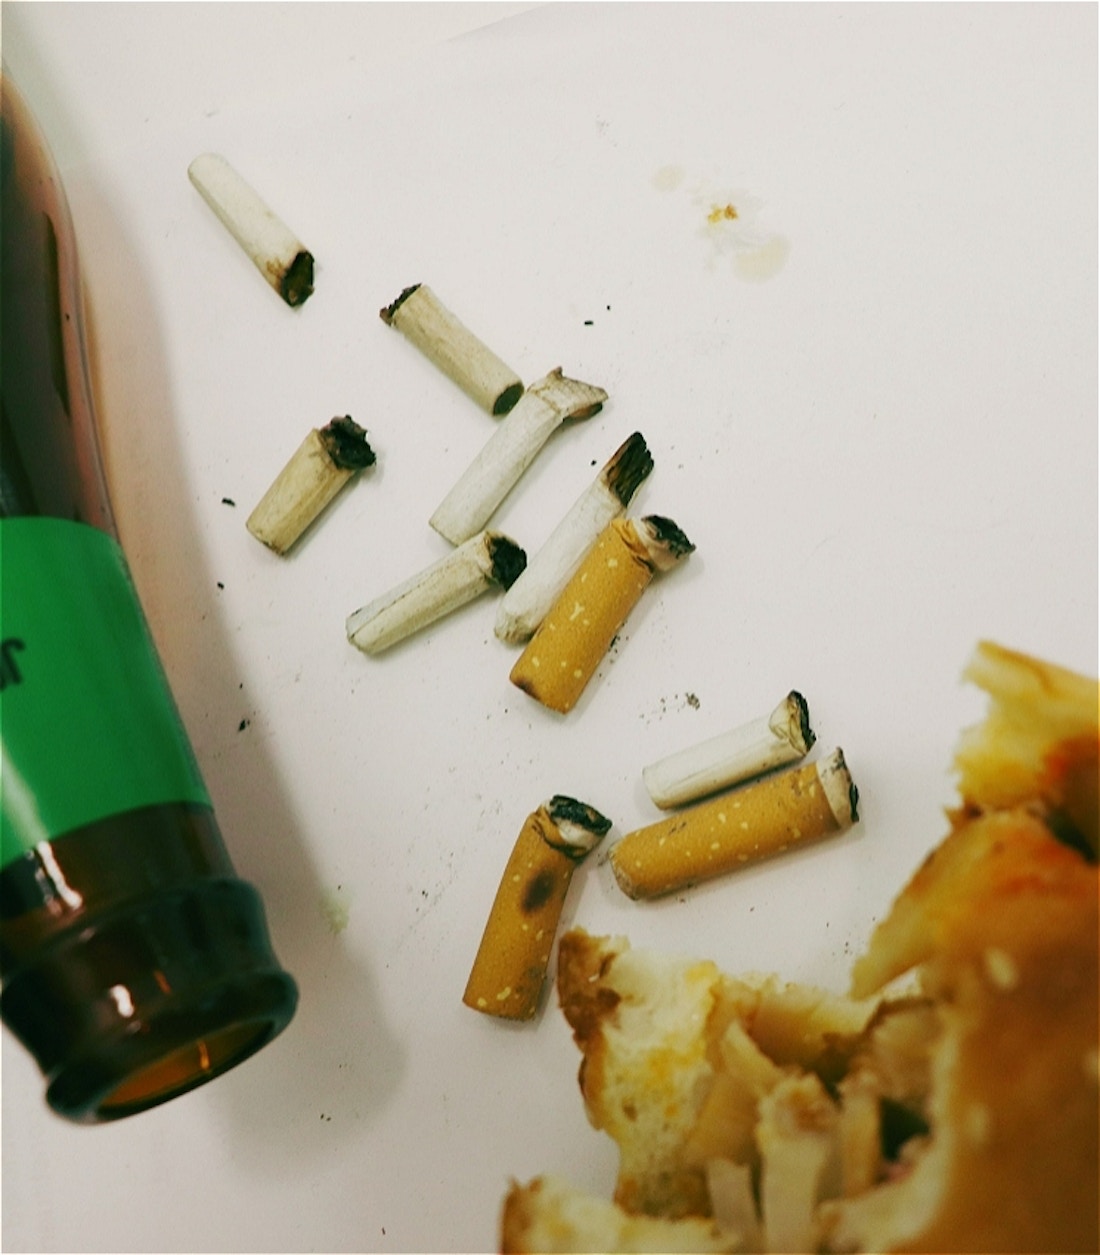 Dirty cigerette butts litter a white background stained with ash. An empty beer bottle with a green label sits on it's side. A kebab with a bite taken out of it is in the corner of the frame.